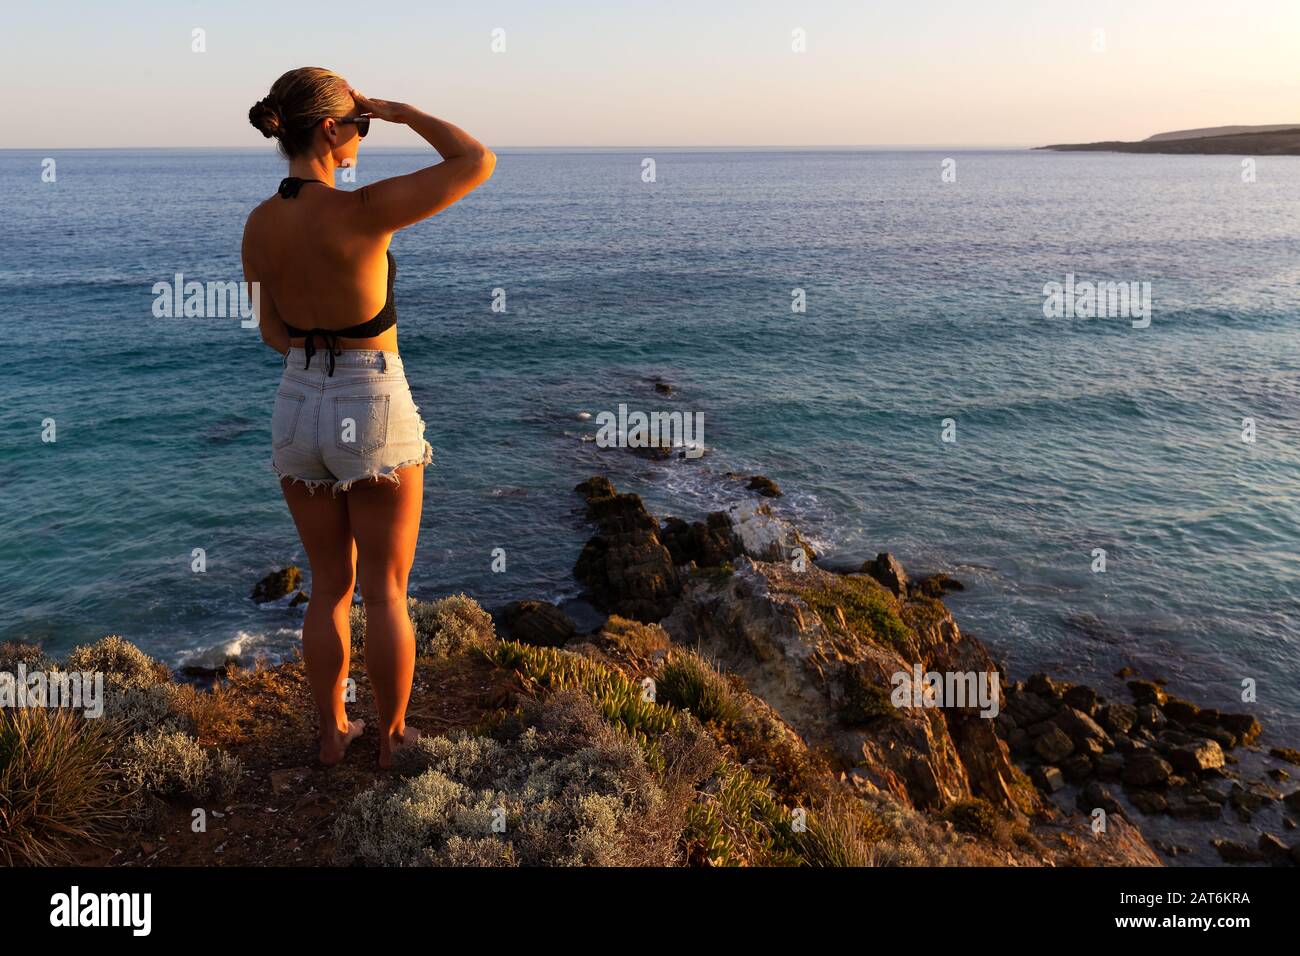 Young woman with beautiful view of ocean and desert coastline at sunset in South Australia Stock Photo